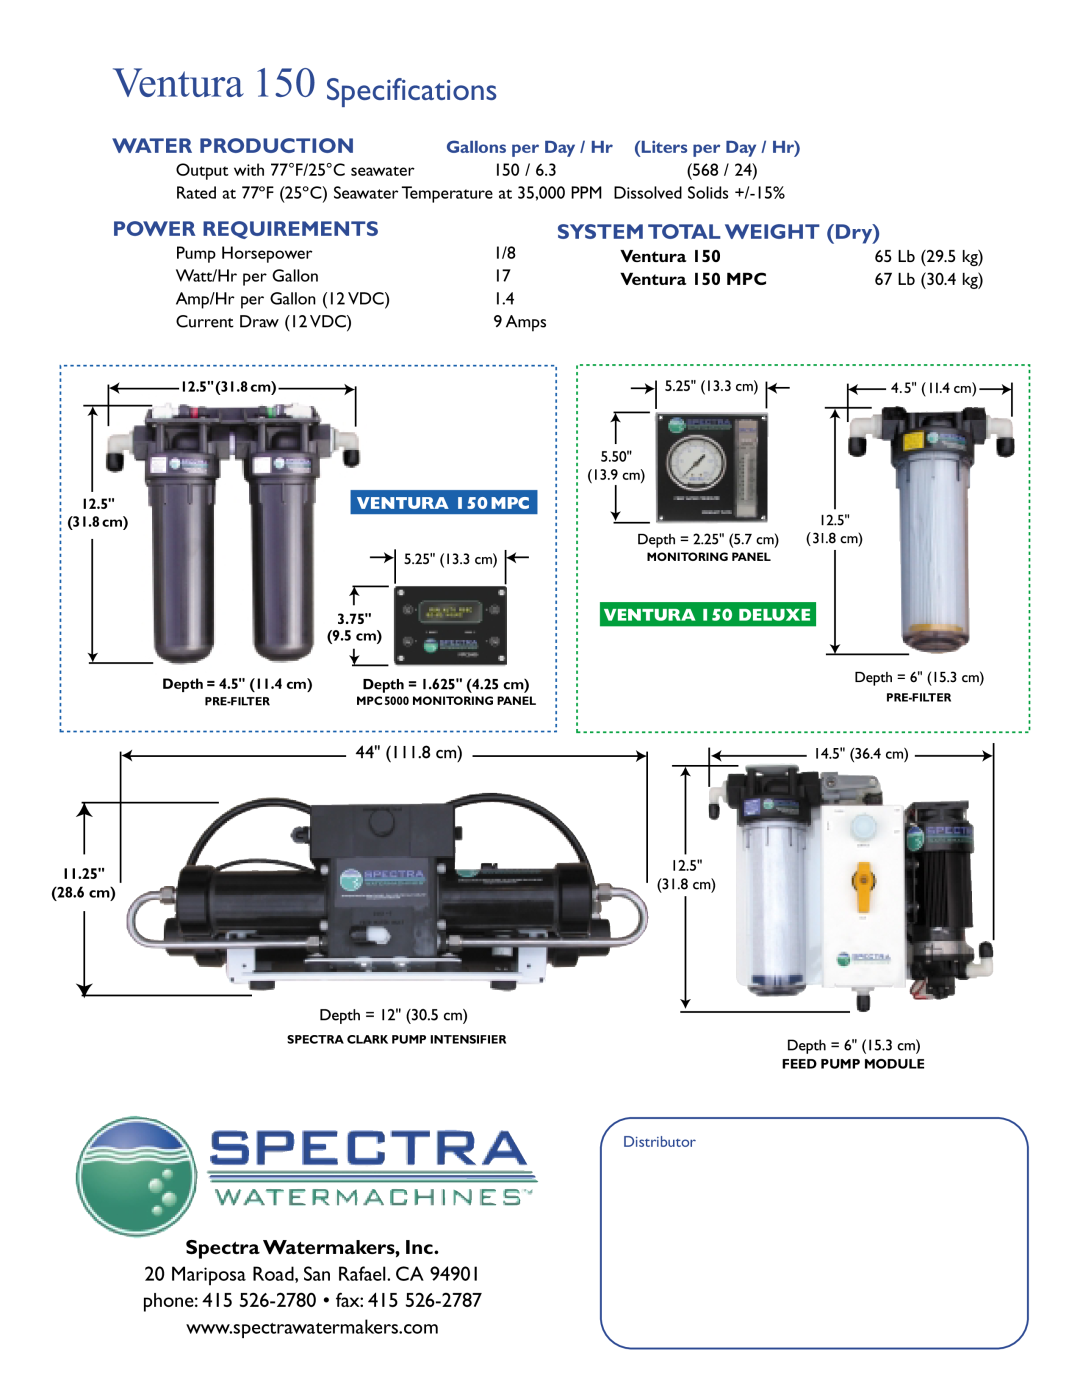 Spectra Watermakers manual Water Production, Power Requirements, SYSTEM TOTAL WEIGHT Dry, Ventura 150 Specifications 